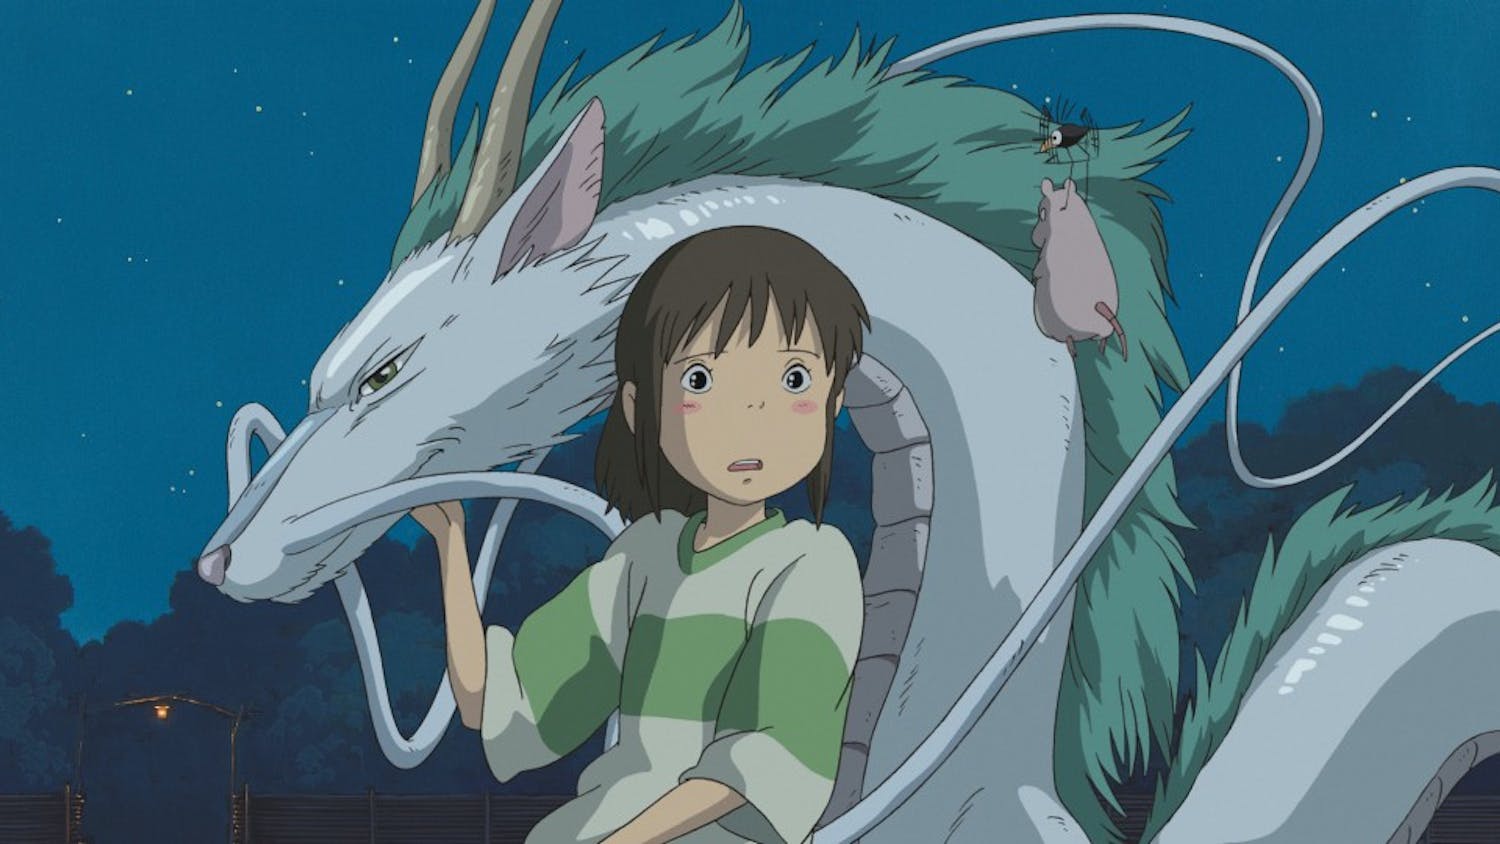 "Spirited Away" is one of many films being shown as part of the&nbsp;Studio Ghibli Collection Film Series.